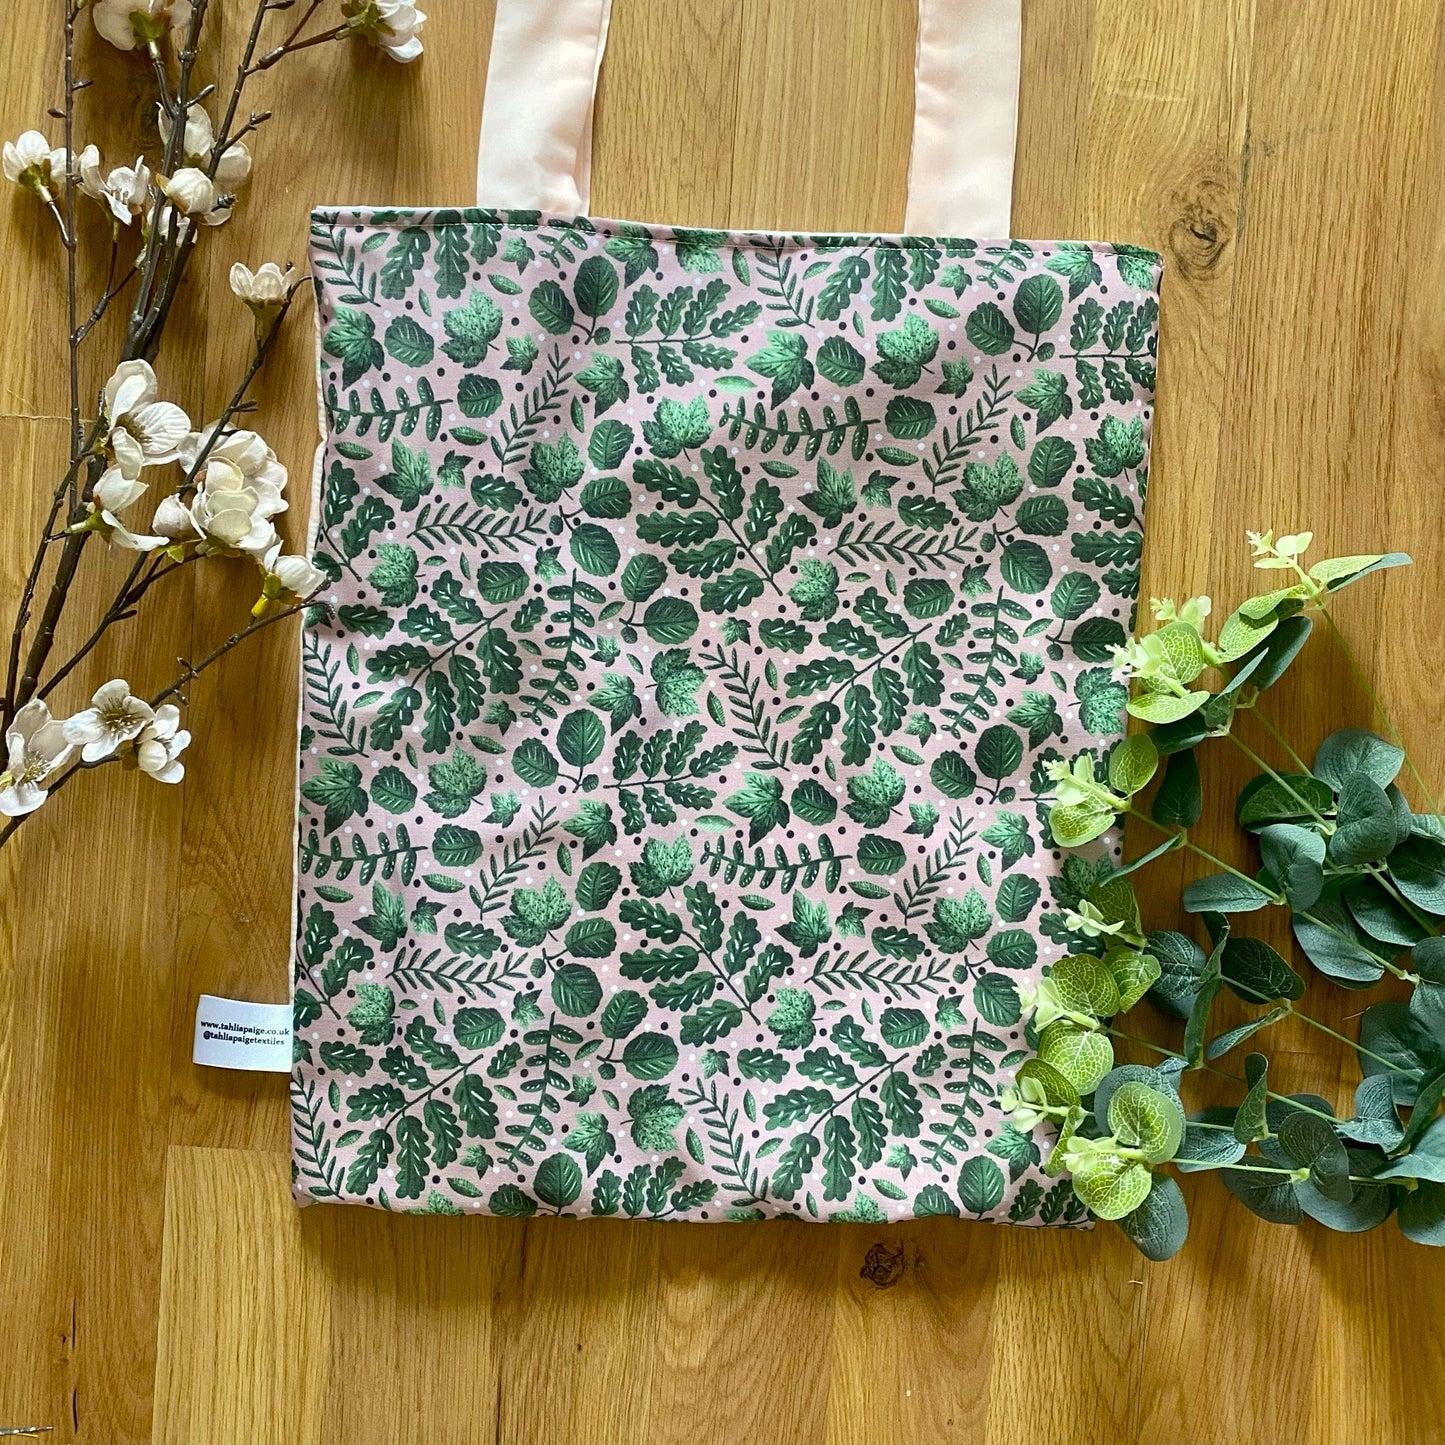 Closeup of the green foliage tote bag on a wooden background with green and pink foliage around it. The green foliage pattern on the bag is green leaves on a pink background.